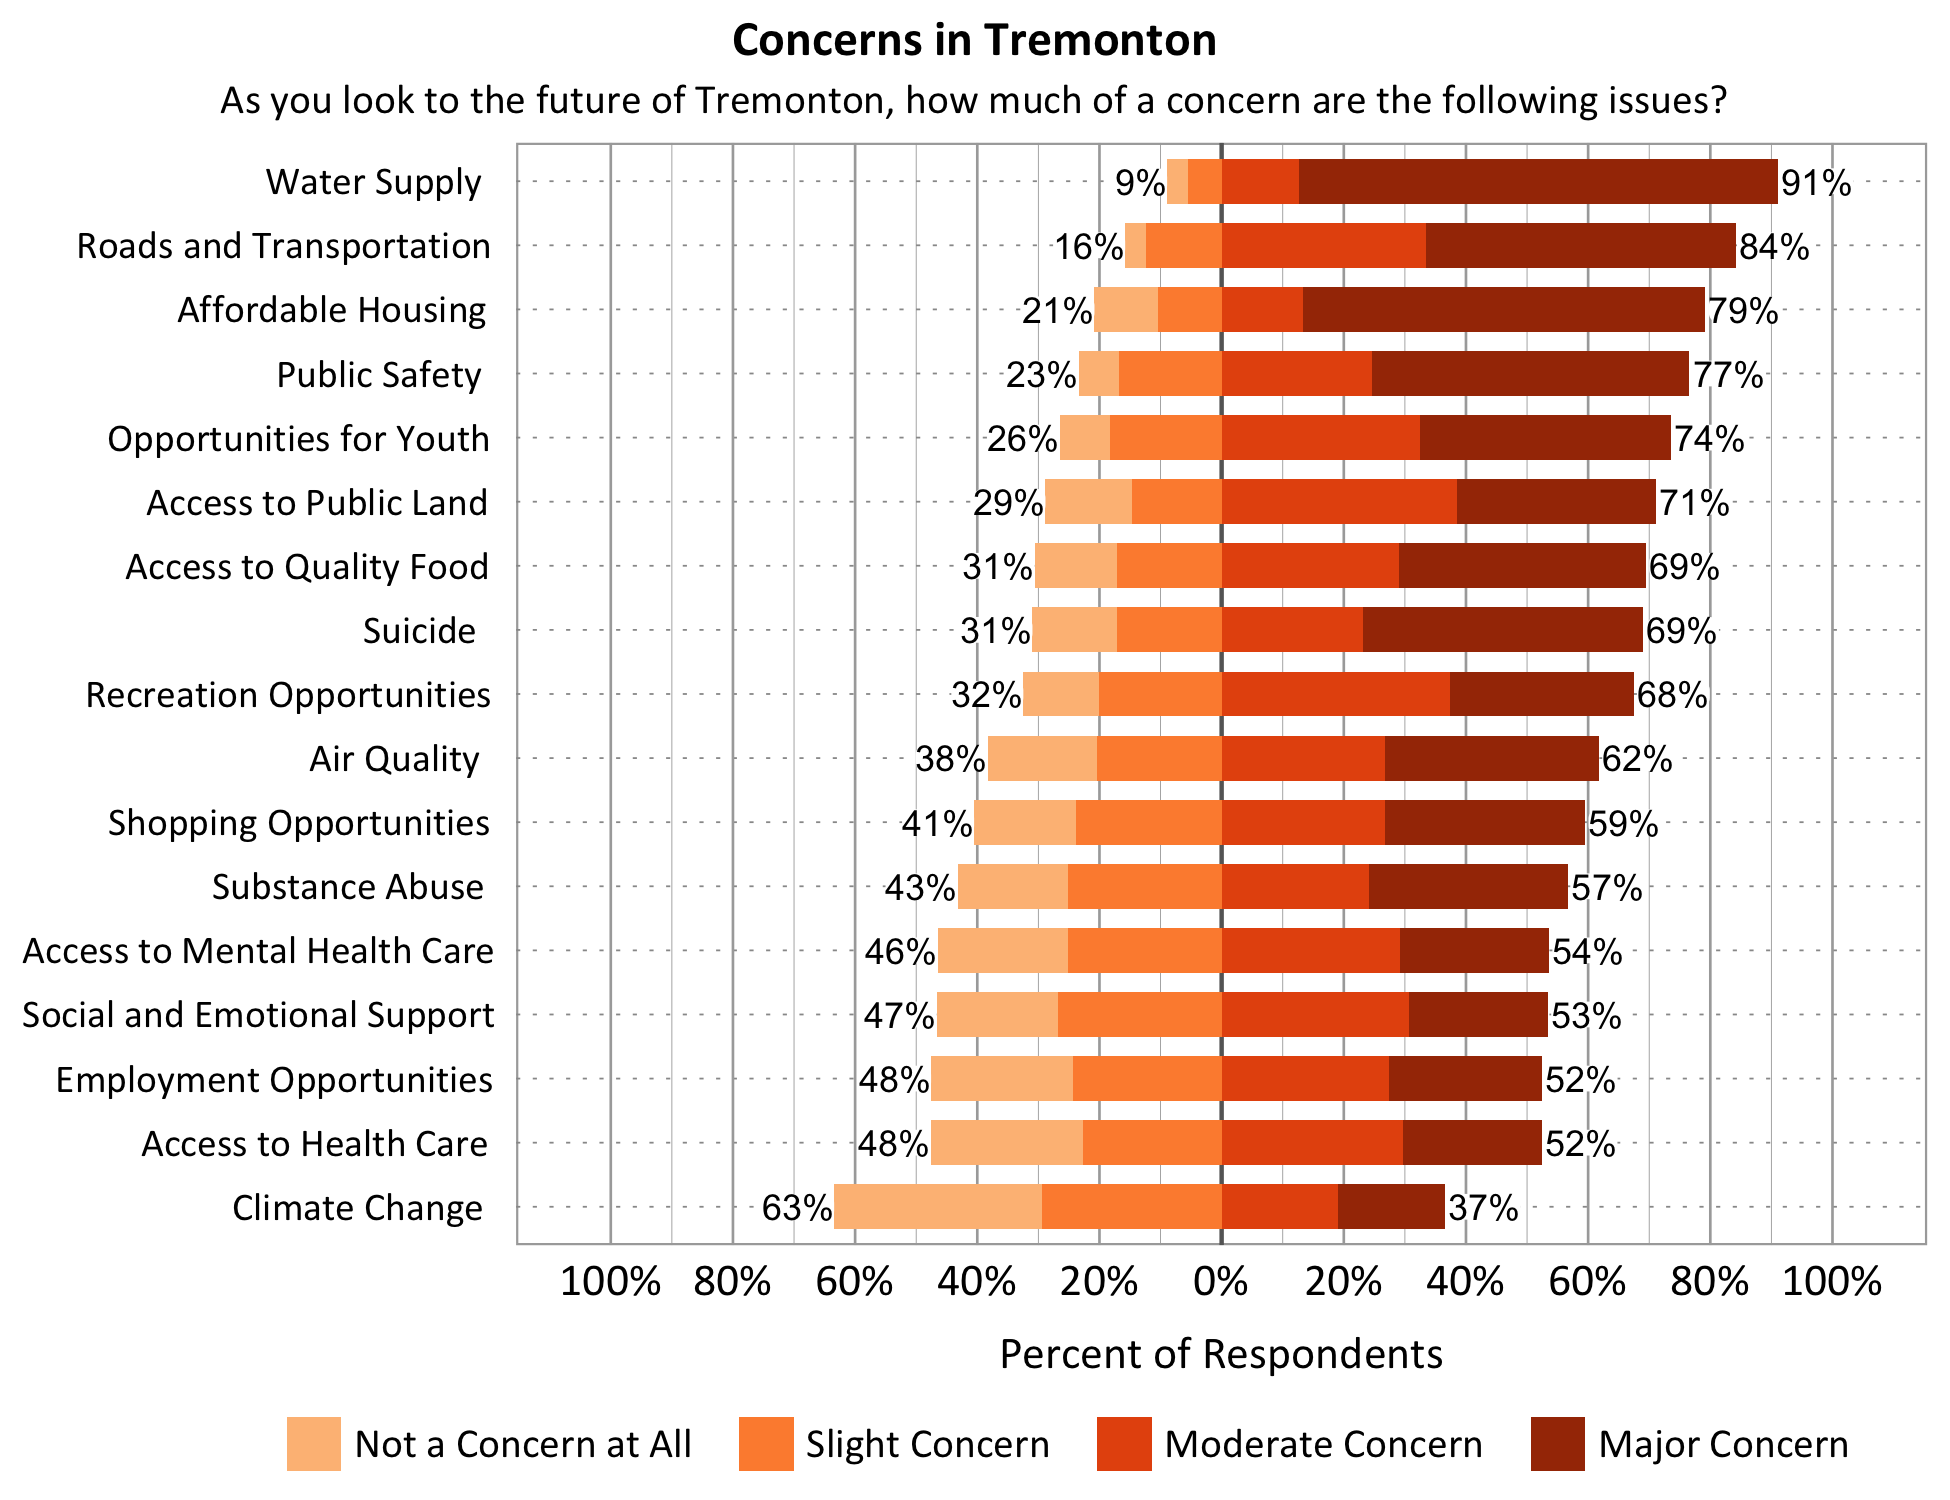 Title: Concerns in Tremonton. Subtitle: As you look to the future of Tremonton, how much of a concern are the following issues? Data – Category: Water Supply- 9% of respondents indicated not a concern at all or slight concern while 91% of respondents indicated a moderate or major concern; Category: Opportunities for Youth- 26% of respondents indicated not a concern at all or slight concern while 74% of respondents indicated a moderate or major concern; Category: Affordable Housing- 21% of respondents indicated not a concern at all or slight concern while 79% of respondents indicated a moderate or major concern; Category: Access to Public Land- 29% of respondents indicated not a concern at all or slight concern while 71% of respondents indicated a moderate or major concern; Category: Employment Opportunities- 48% of respondents indicated not a concern at all or slight concern while 52% of respondents indicated a moderate or major concern; Category: Access to Quality Food- 31% of respondents indicated not a concern at all or slight concern while 69% of respondents indicated a moderate or major concern; Category: Shopping Opportunities- 41% of respondents indicated not a concern at all or slight concern while 59% of respondents indicated a moderate or major concern; Category: Recreation Opportunities- 32% of respondents indicated not a concern at all or slight concern while 68% of respondents indicated a moderate or major concern; Category: Substance Abuse- 43% of respondents indicated not a concern at all or slight concern while 67% of respondents indicated a moderate or major concern; Category: Roads and Transportation- 16% of respondents indicated not a concern at all or slight concern while 84% of respondents indicated a moderate or major concern; Category: Social and Emotional Support- 47% of respondents indicated not a concern at all or slight concern while 53% of respondents indicated a moderate or major concern; Category: Access to Health Care- 48% of respondents indicated not a concern at all or slight concern while 52% of respondents indicated a moderate or major concern; Category: Public Safety- 23% of respondents indicated not a concern at all or slight concern while 77% of respondents indicated a moderate or major concern; Category: Access to Mental Health Care - 46% of respondents indicated not a concern at all or slight concern while 54% of respondents indicated a moderate or major concern; Category: Air Quality- 38% of respondents indicated not a concern at all or slight concern while 62% of respondents indicated a moderate or major concern. Category: Climate Change- 63% of respondents indicated not a concern at all or slight concern while 37% of respondents indicated a moderate or major concern.